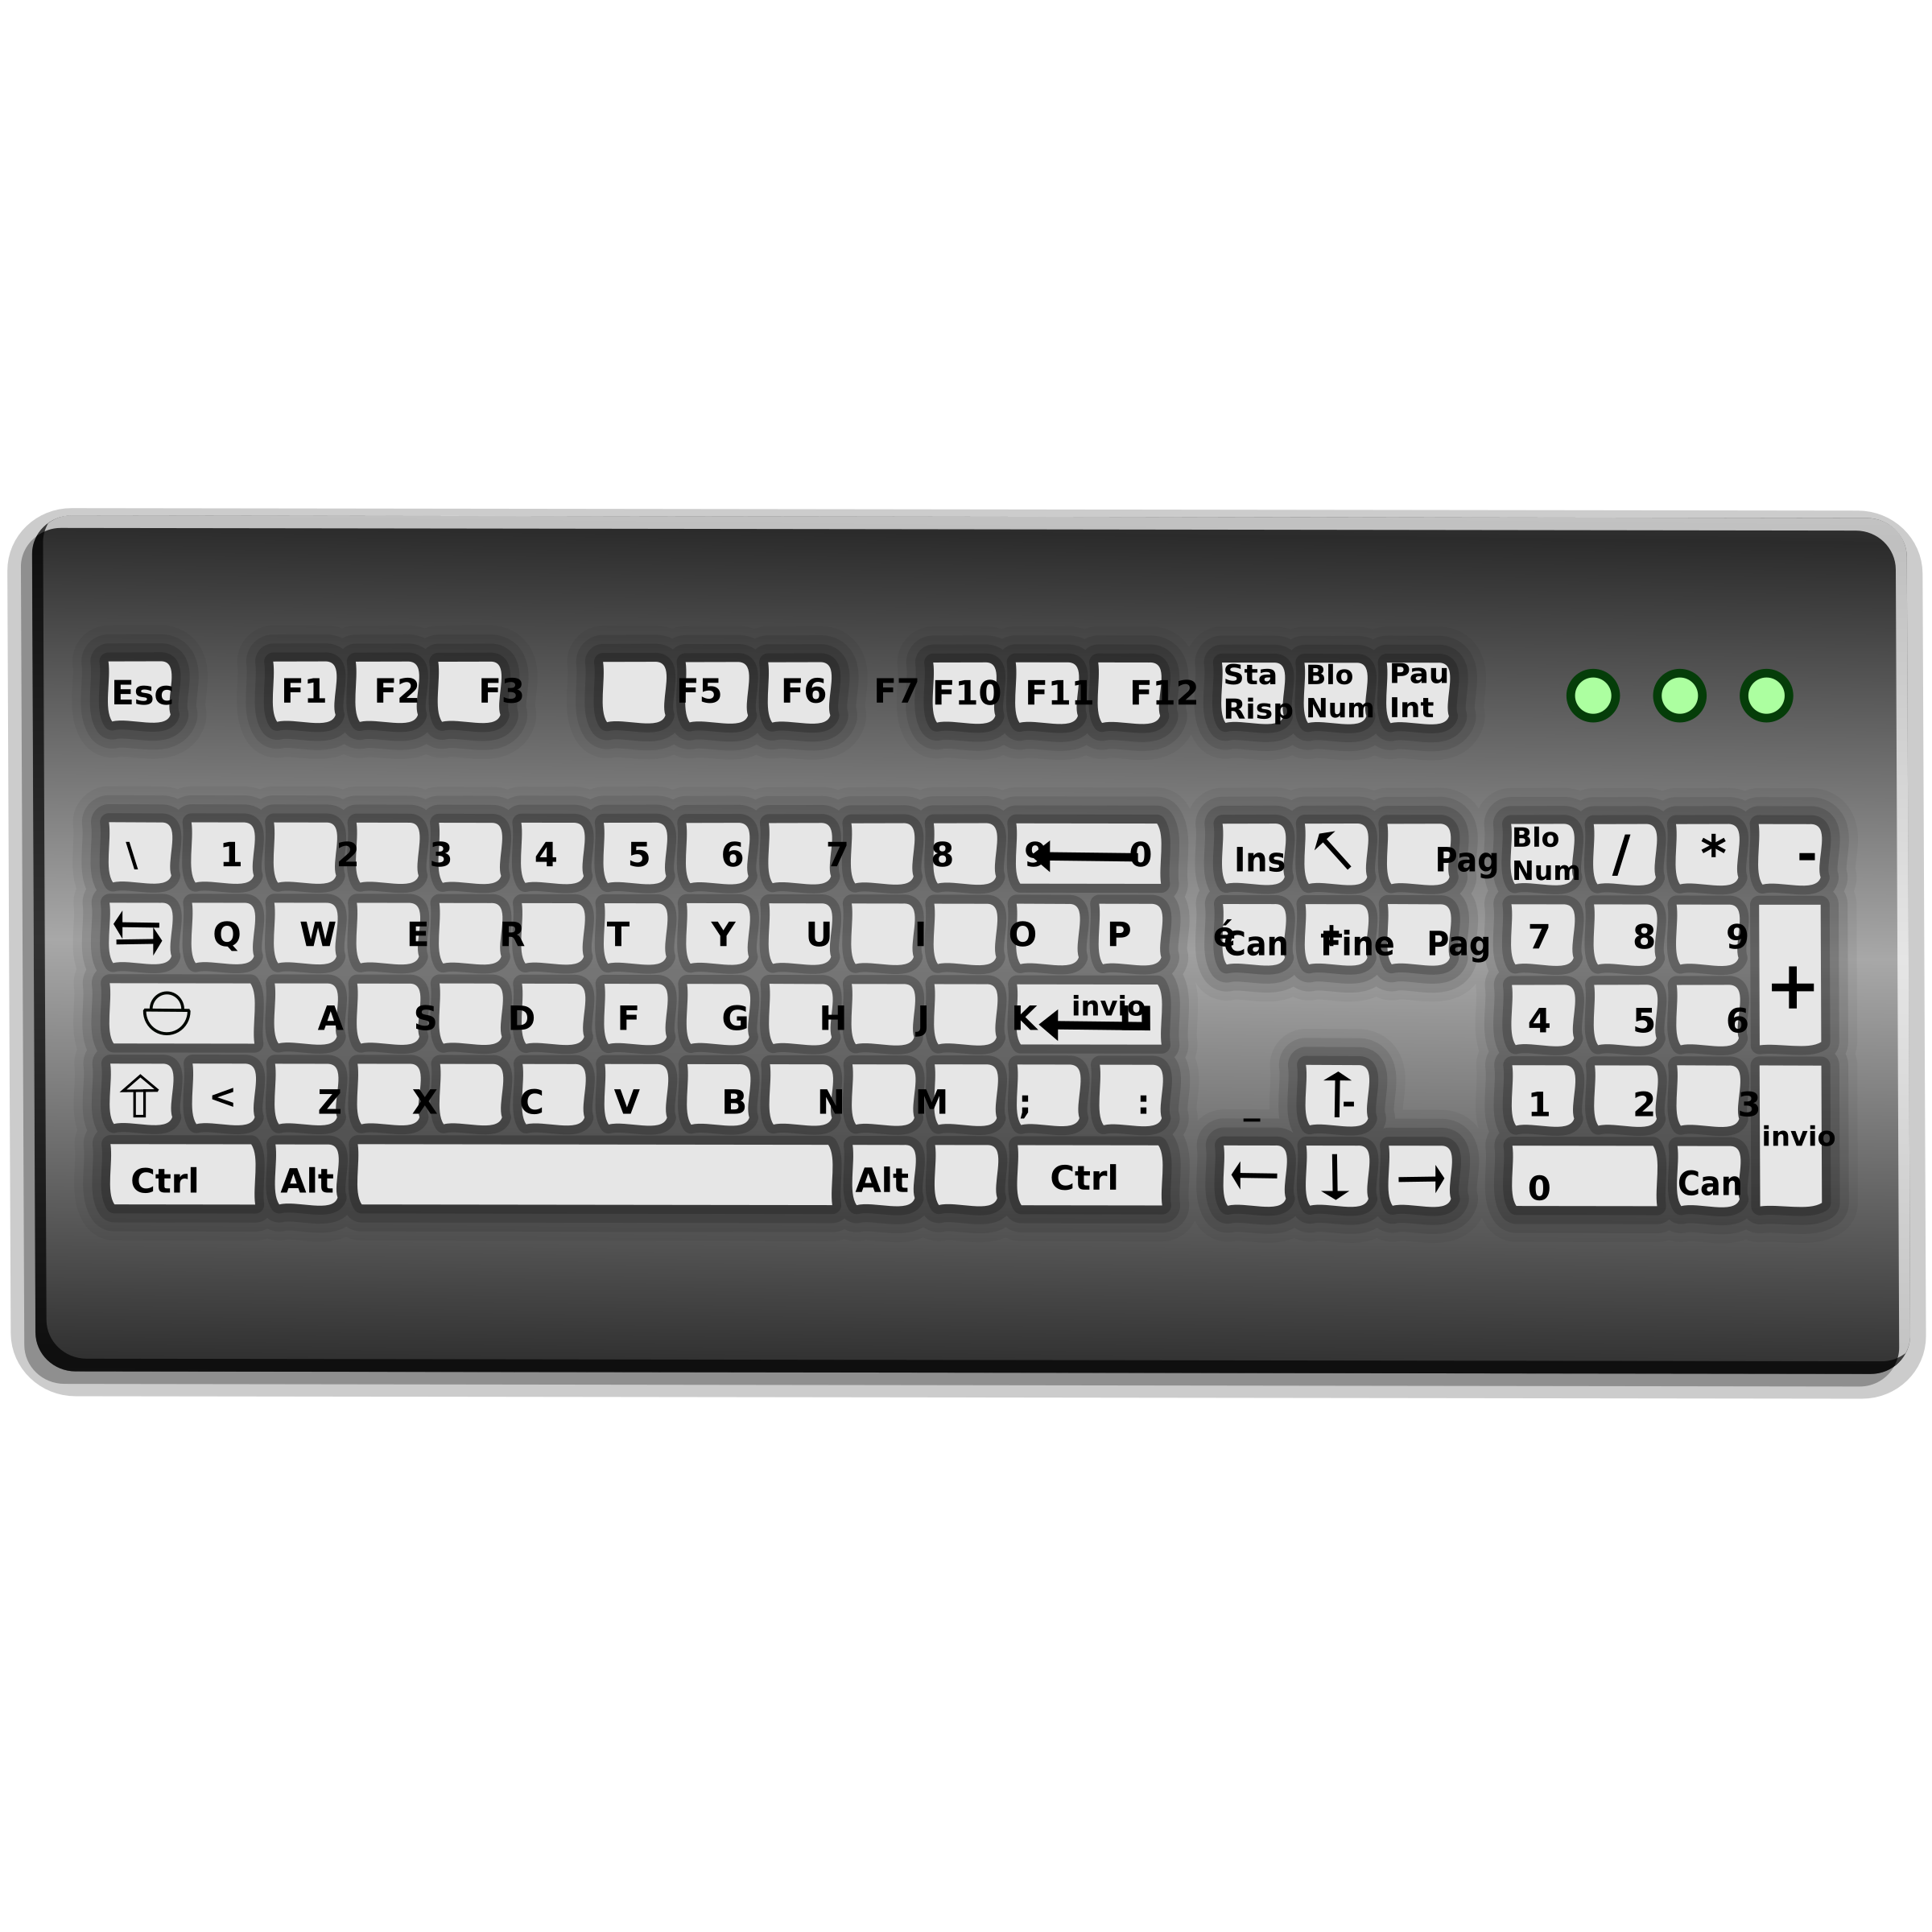 Big image png. Keyboard clipart compuer